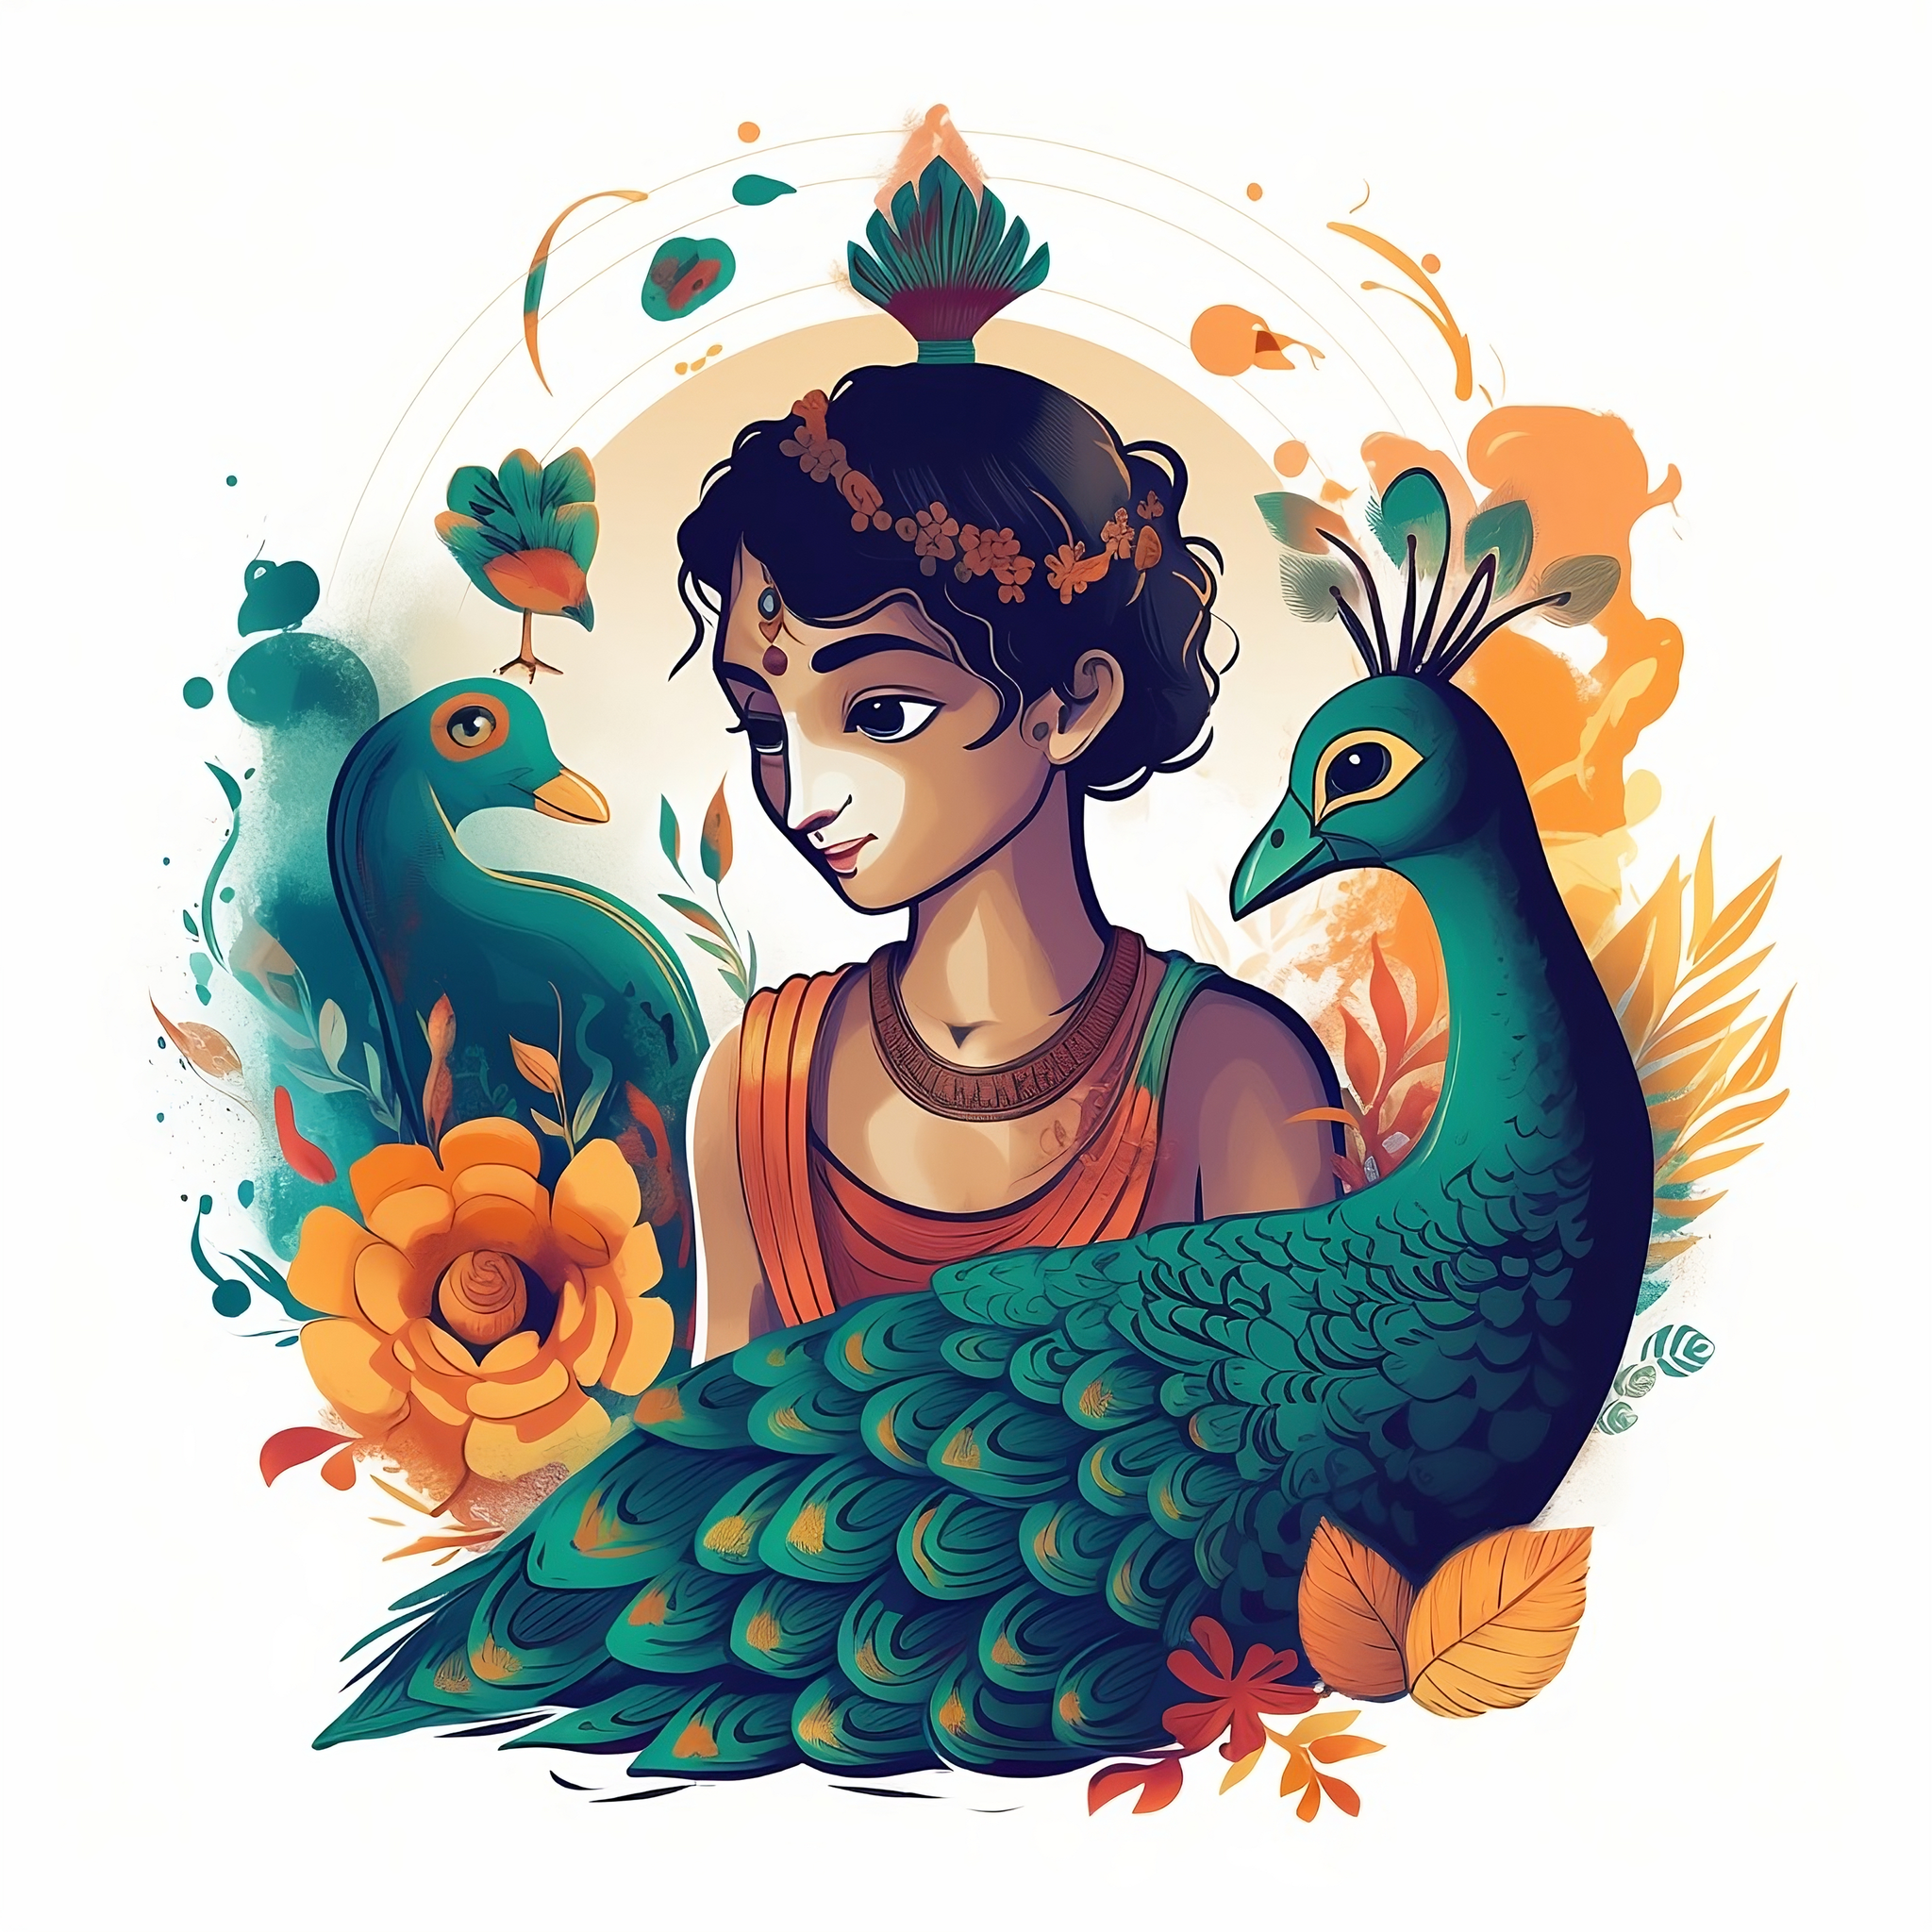 Divine Serenity: Baal Krishna and his Peacock Companions in Vector Art Print on White Background